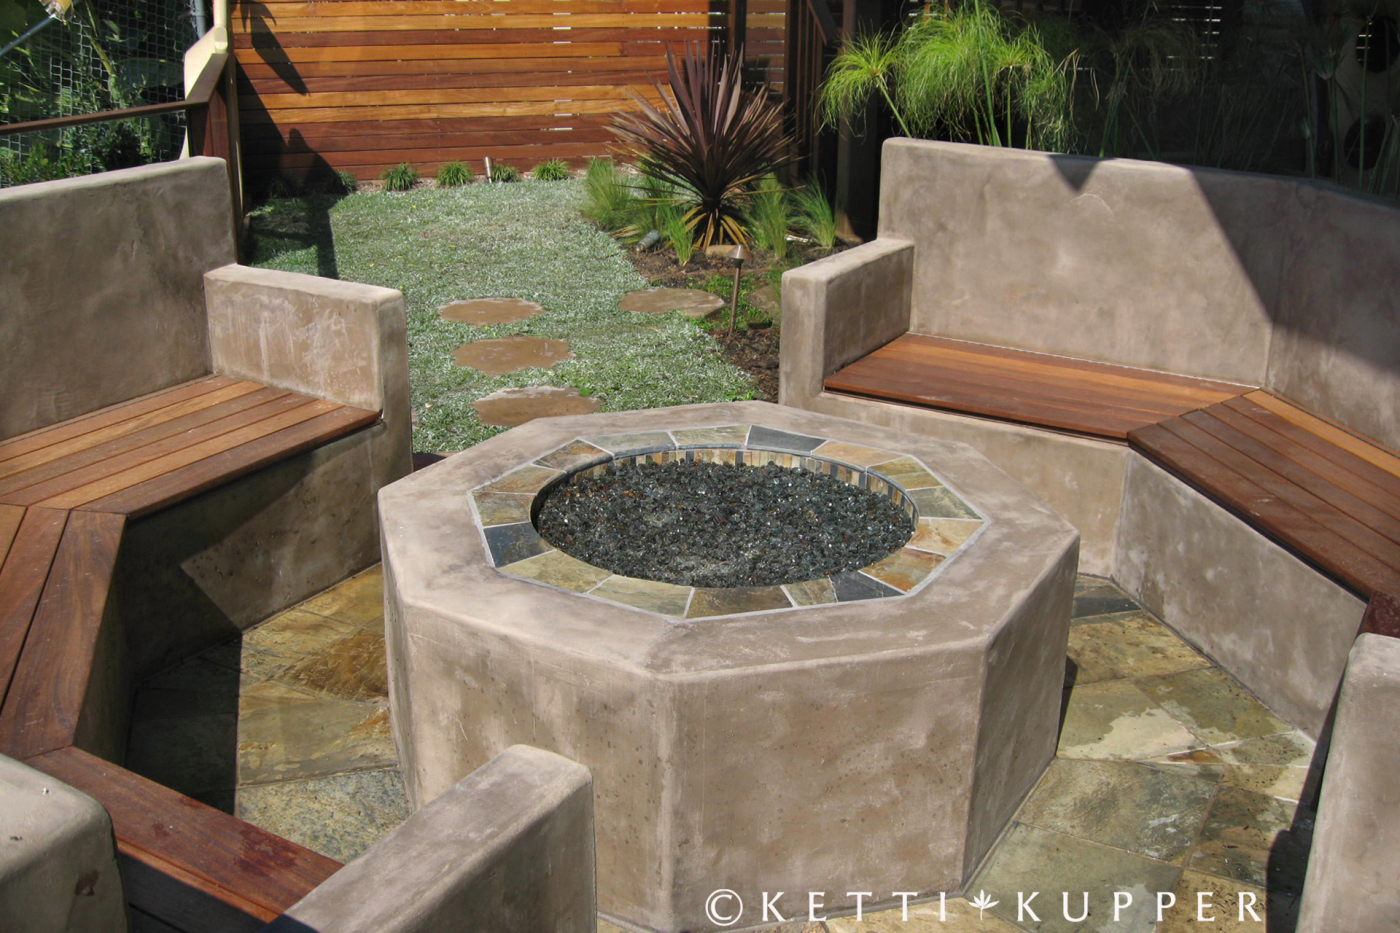 Octagon Shape Fire Pit with Seats.Ketti Kupper.C